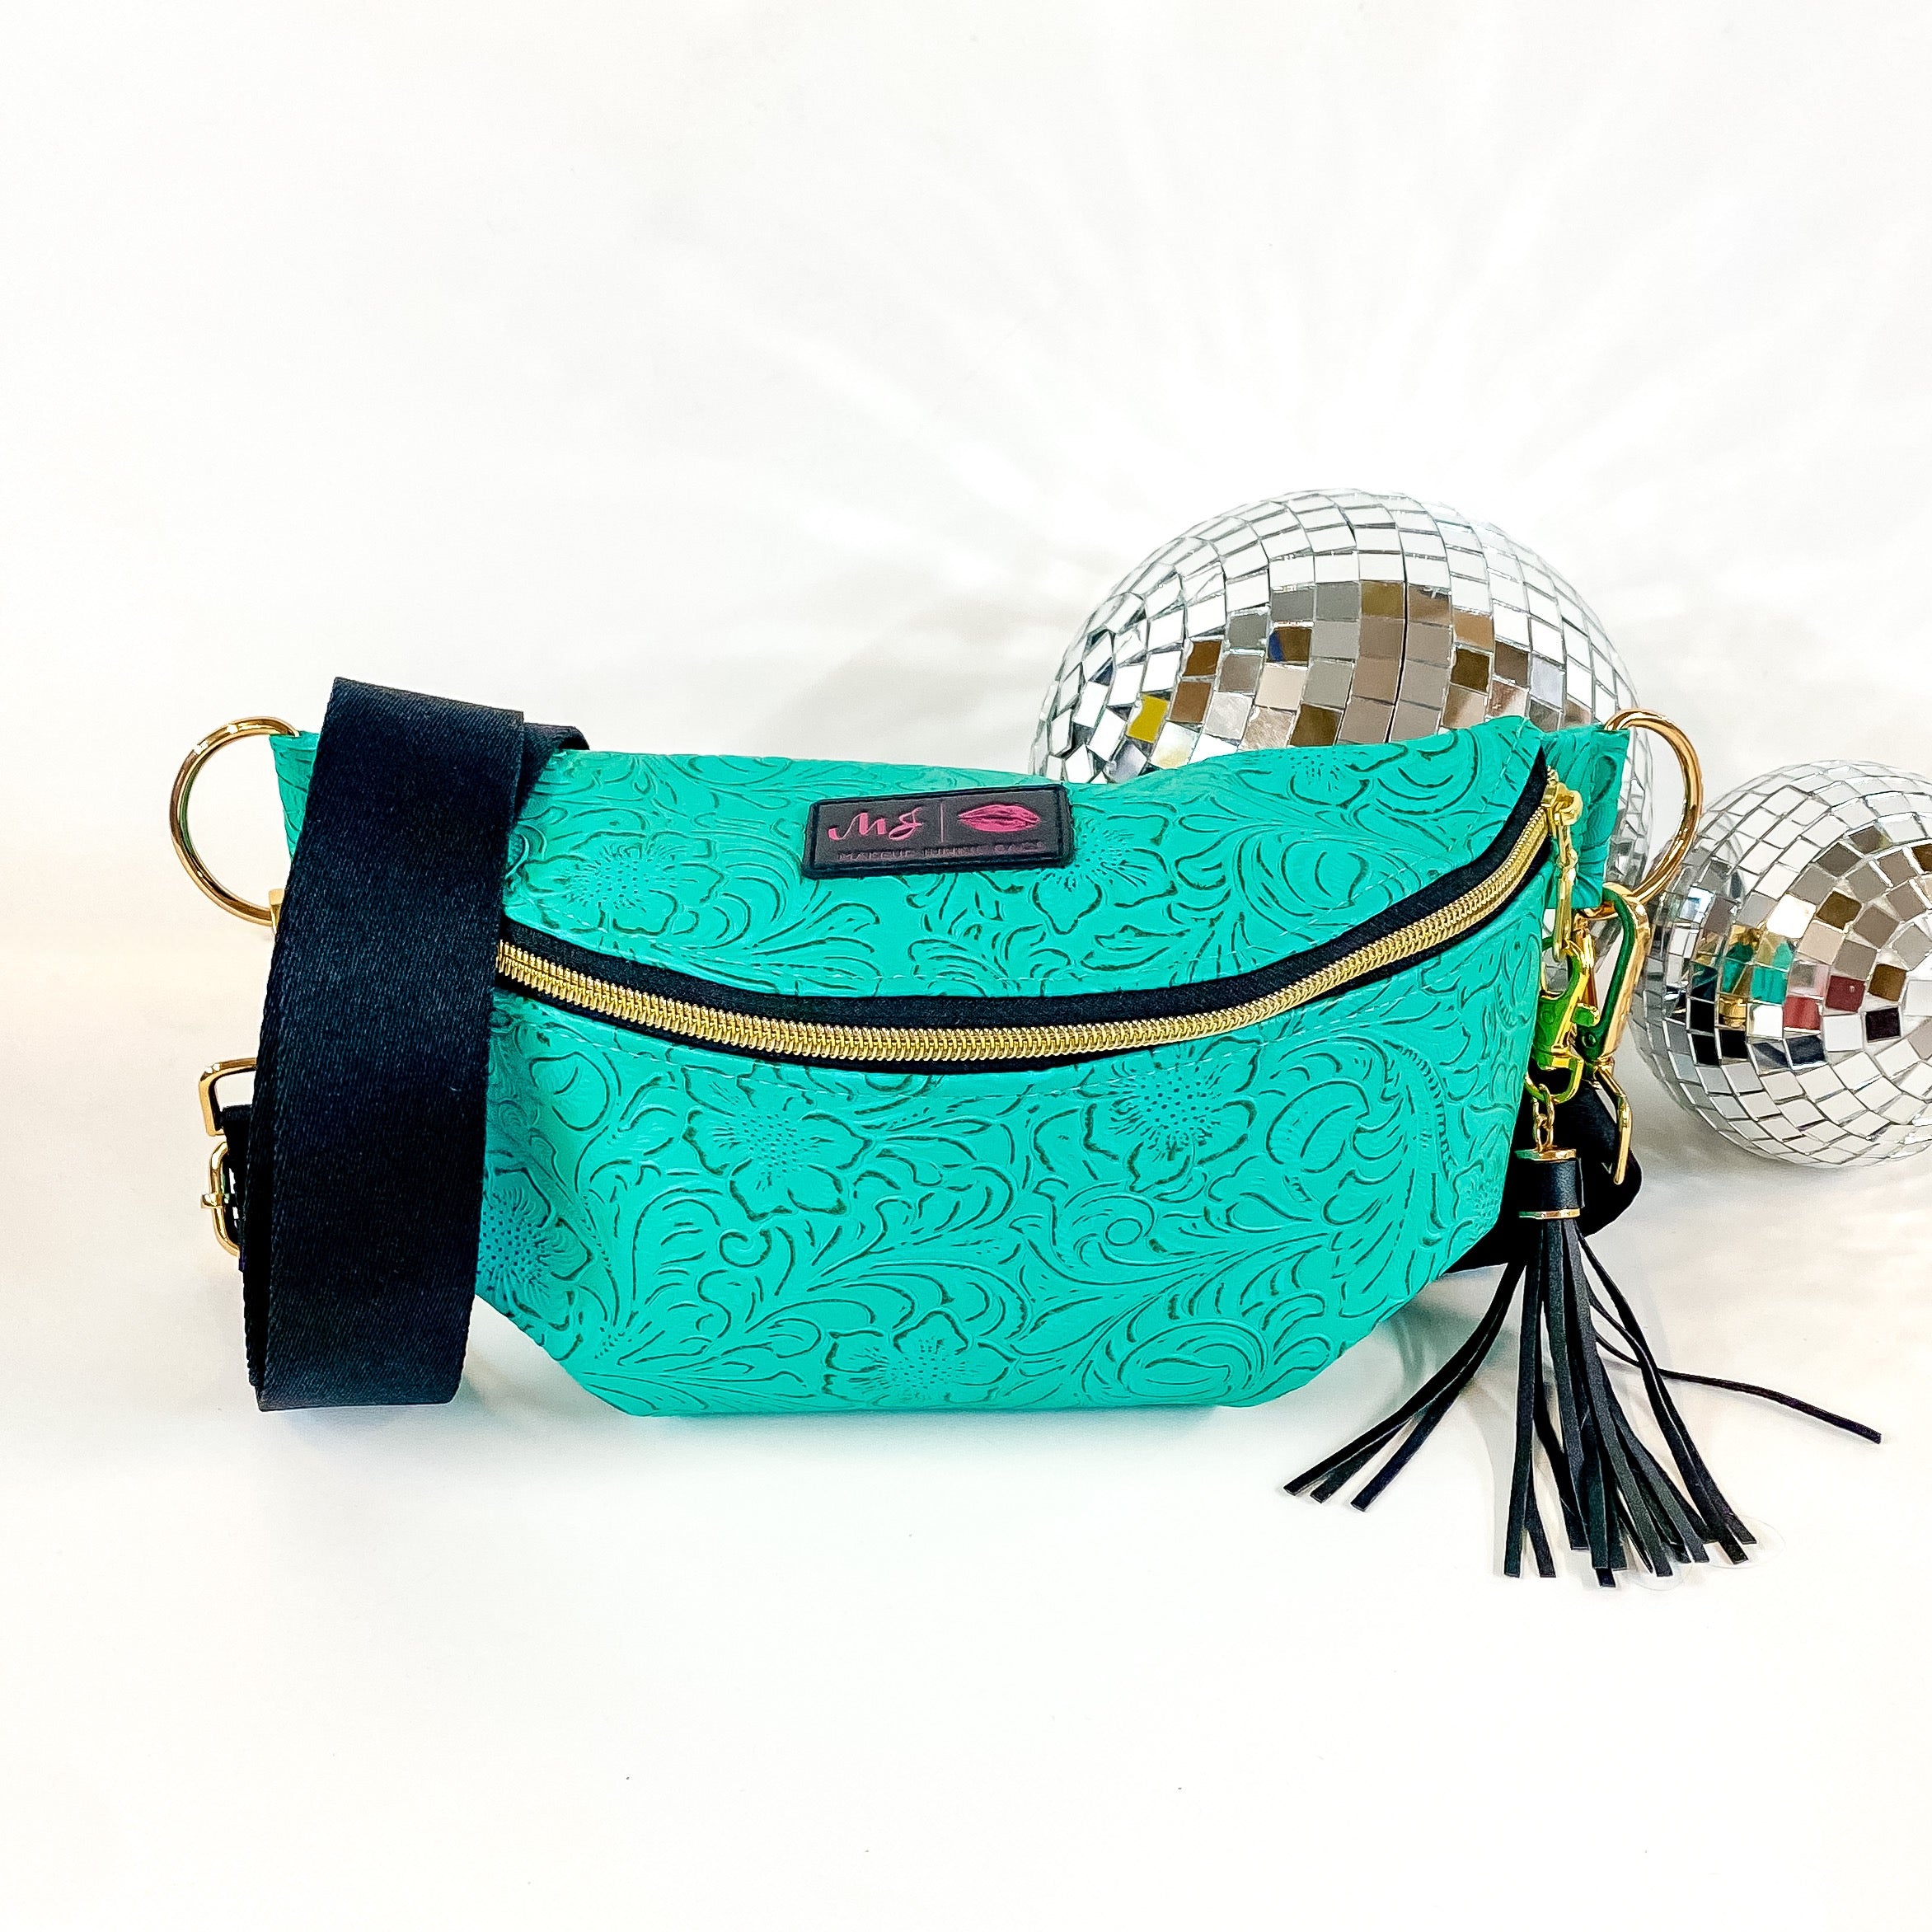 Pictured on a white background with disco balls in the background is a sidekick bag in a turquoise leather tooled print. This bag includes a middle zipper and a tassel.